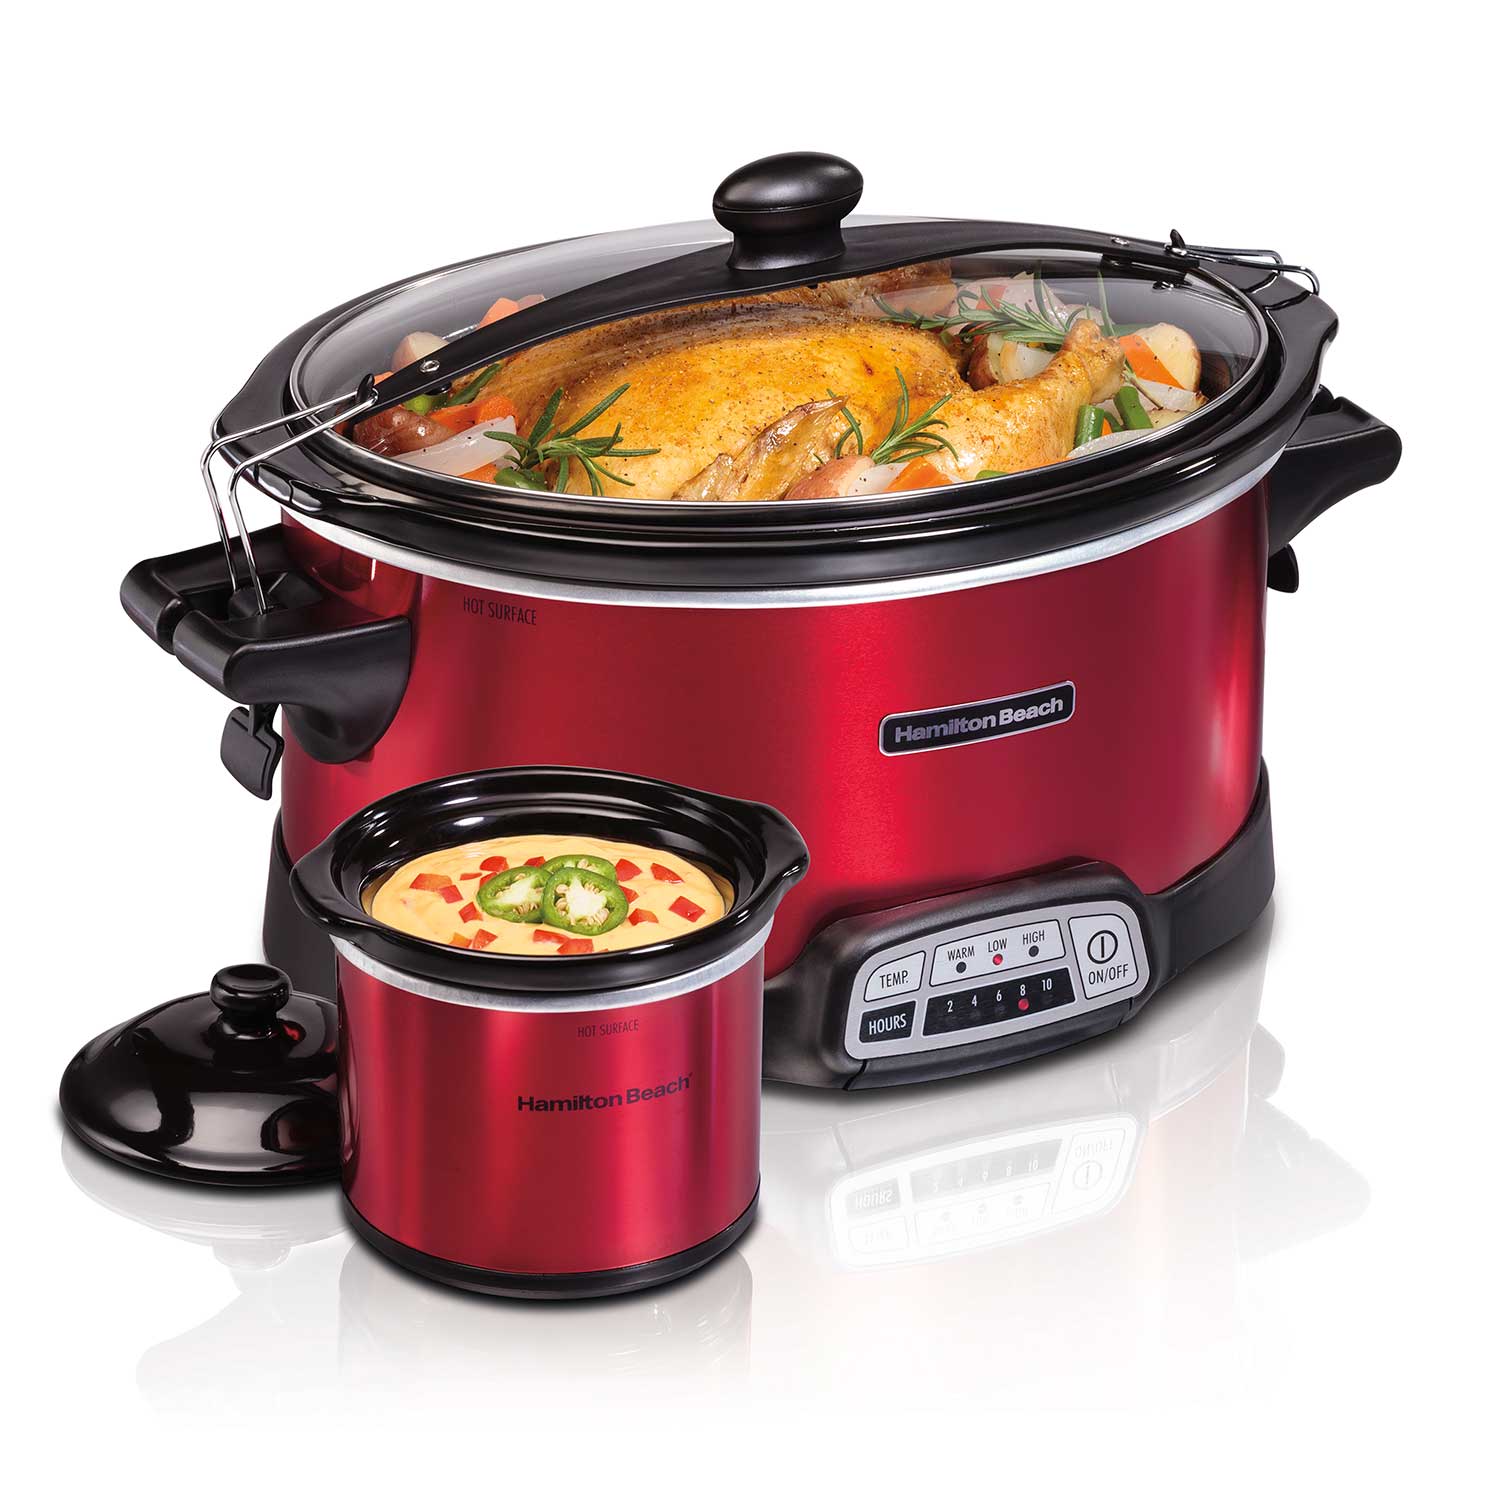 Stay or Go® Programmable Slow Cooker, Red (33478)